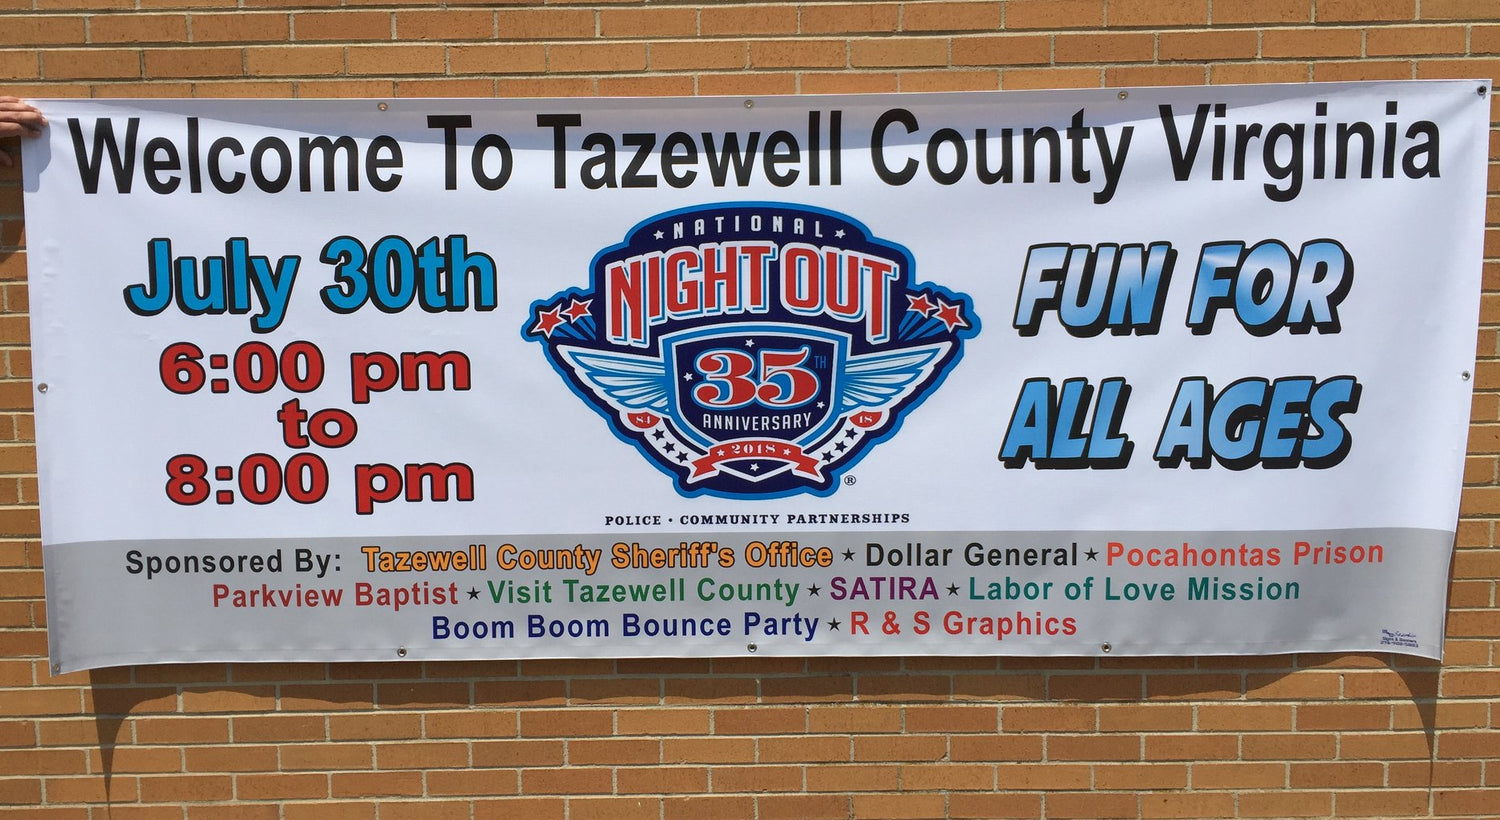 Banners - Custom Banners Made in Tazewell, Virginia - 13 Ounce Full Color Printed Banners - RSGfx.com